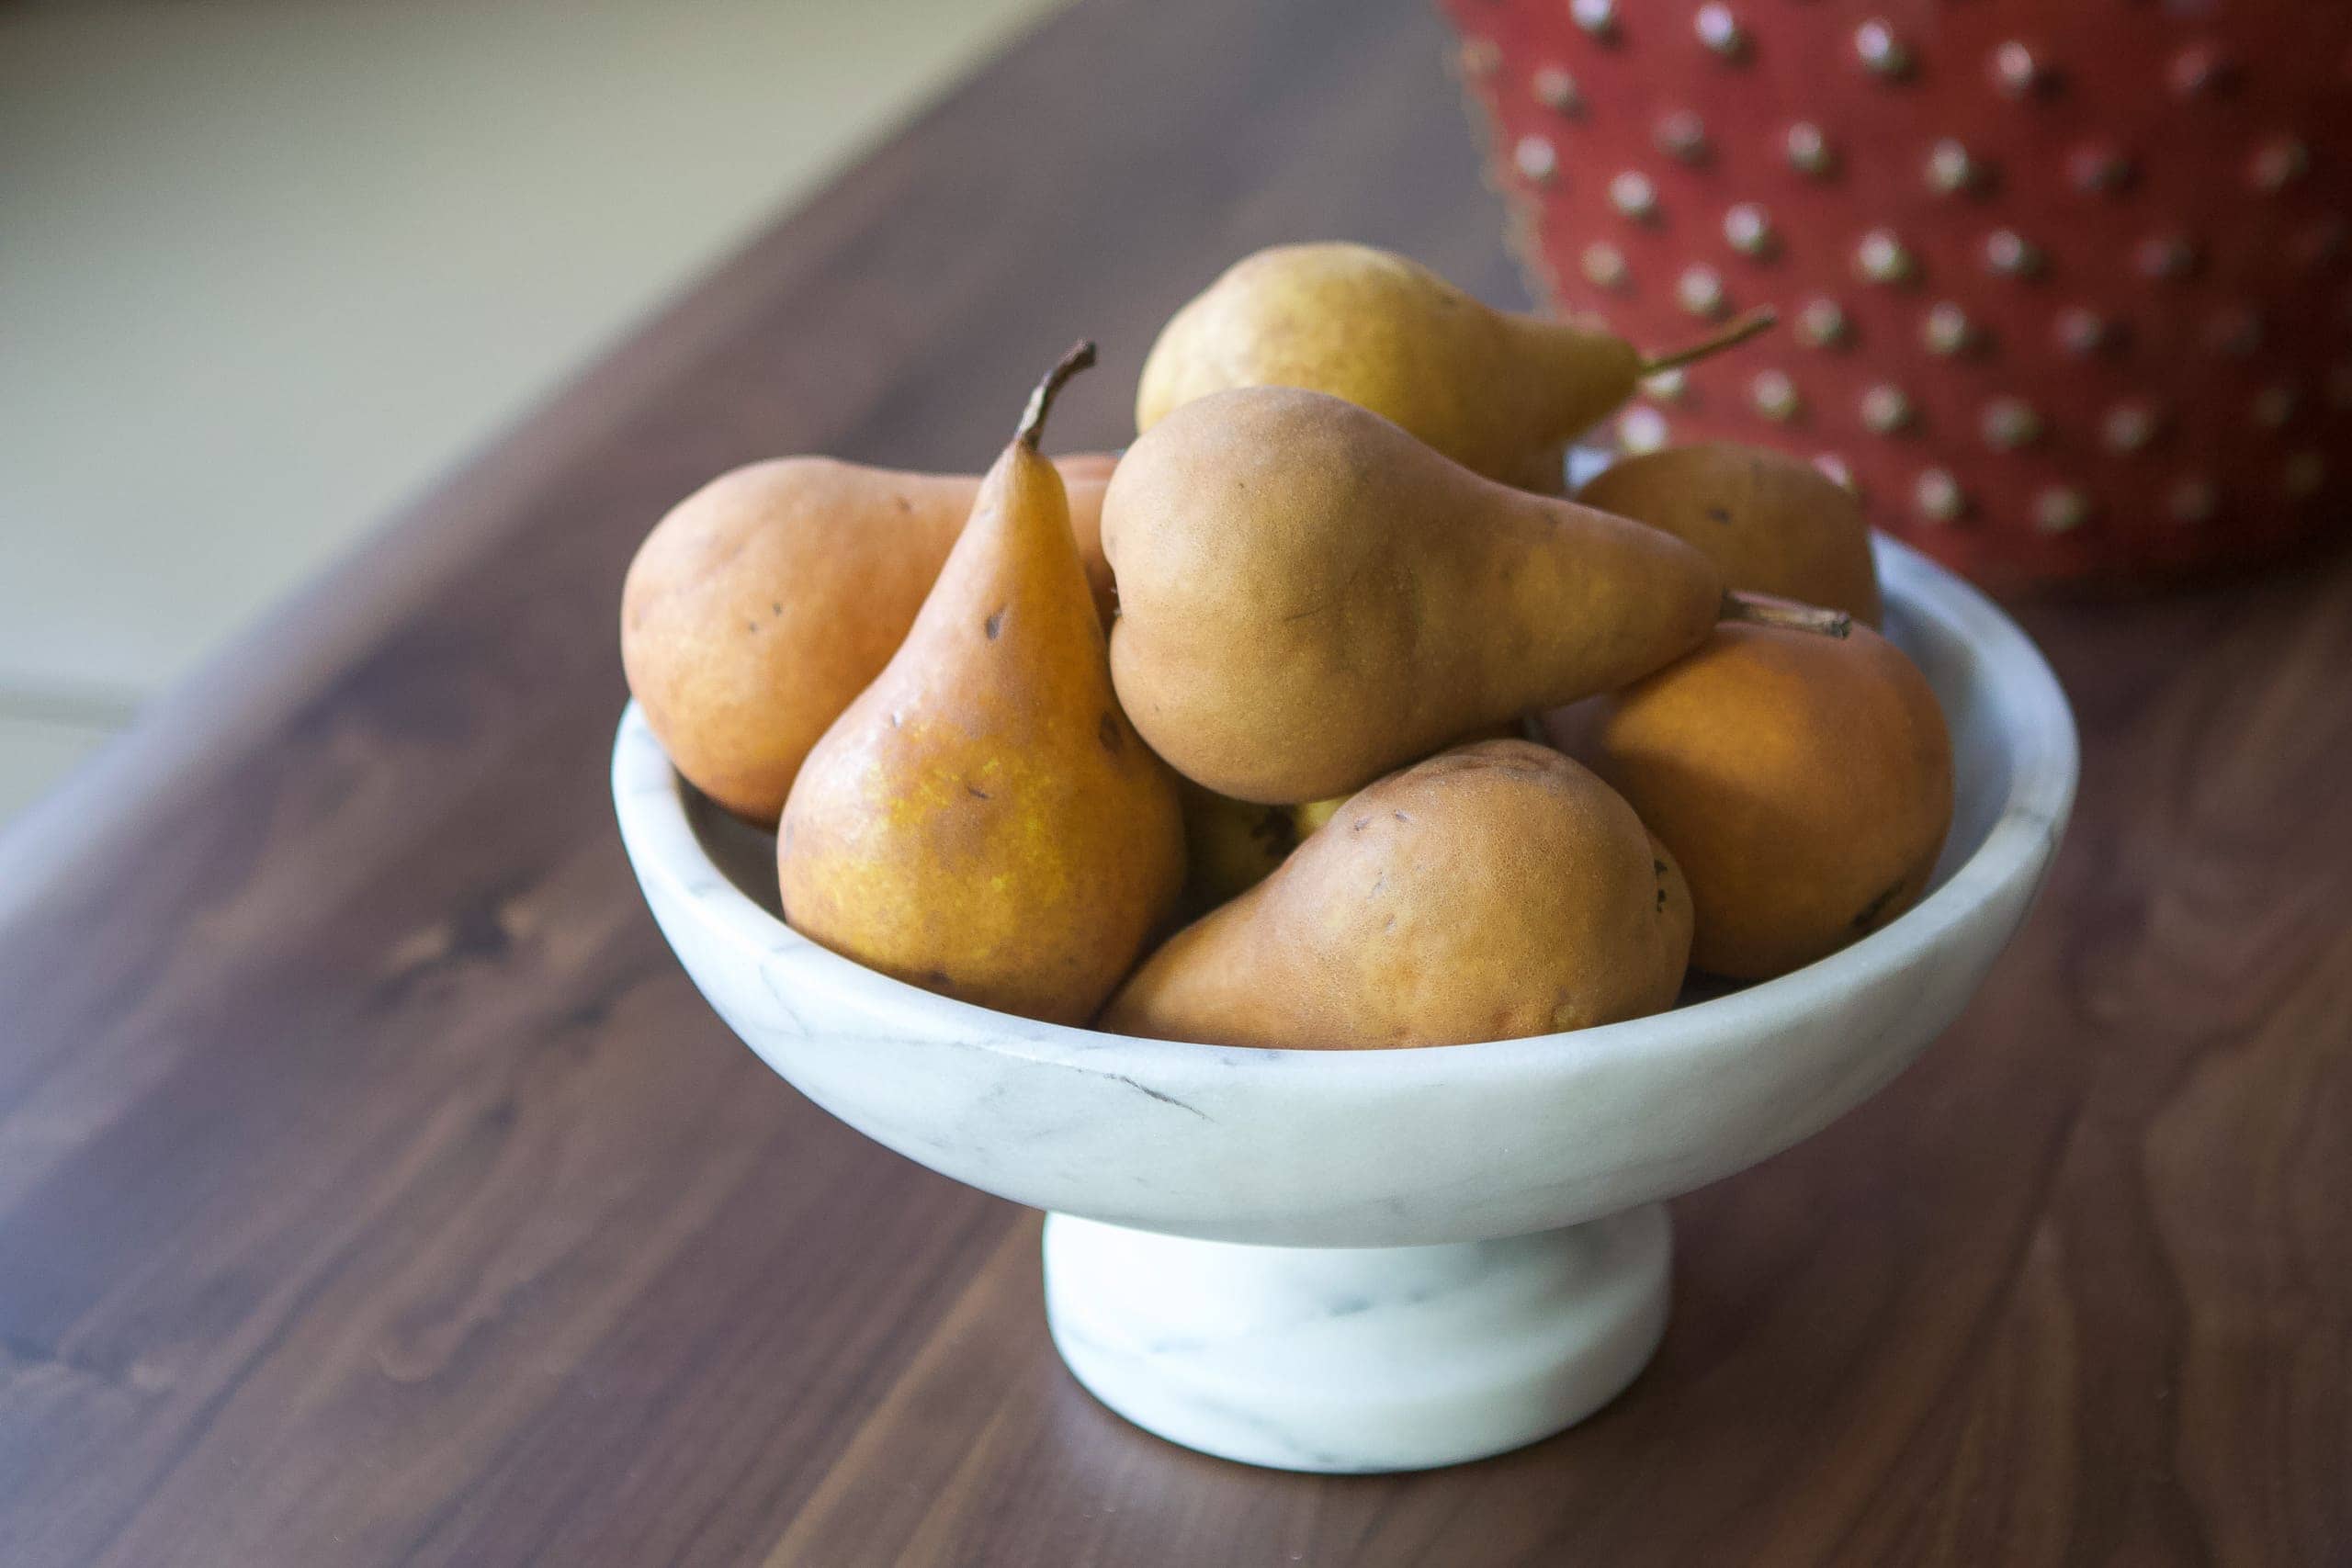 Adding decorative pears to the dining room table